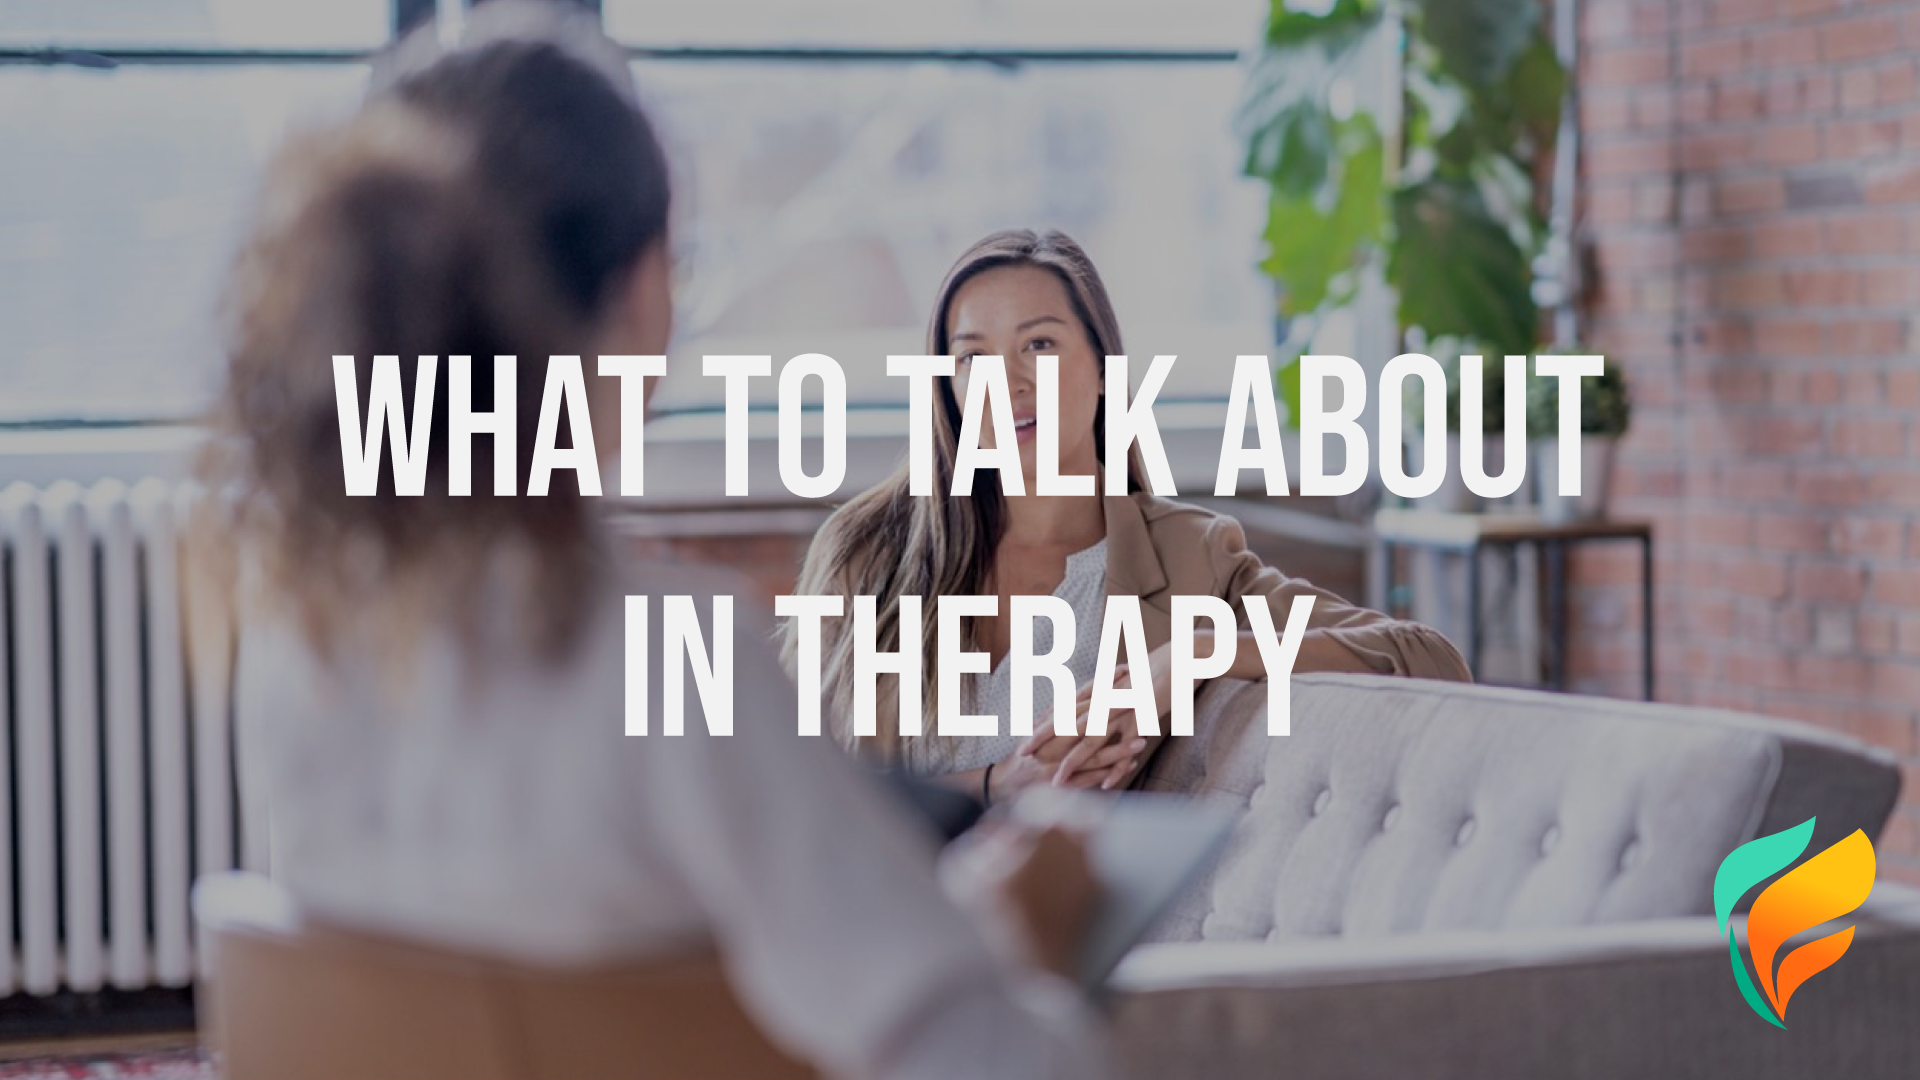 What to talk about in therapy